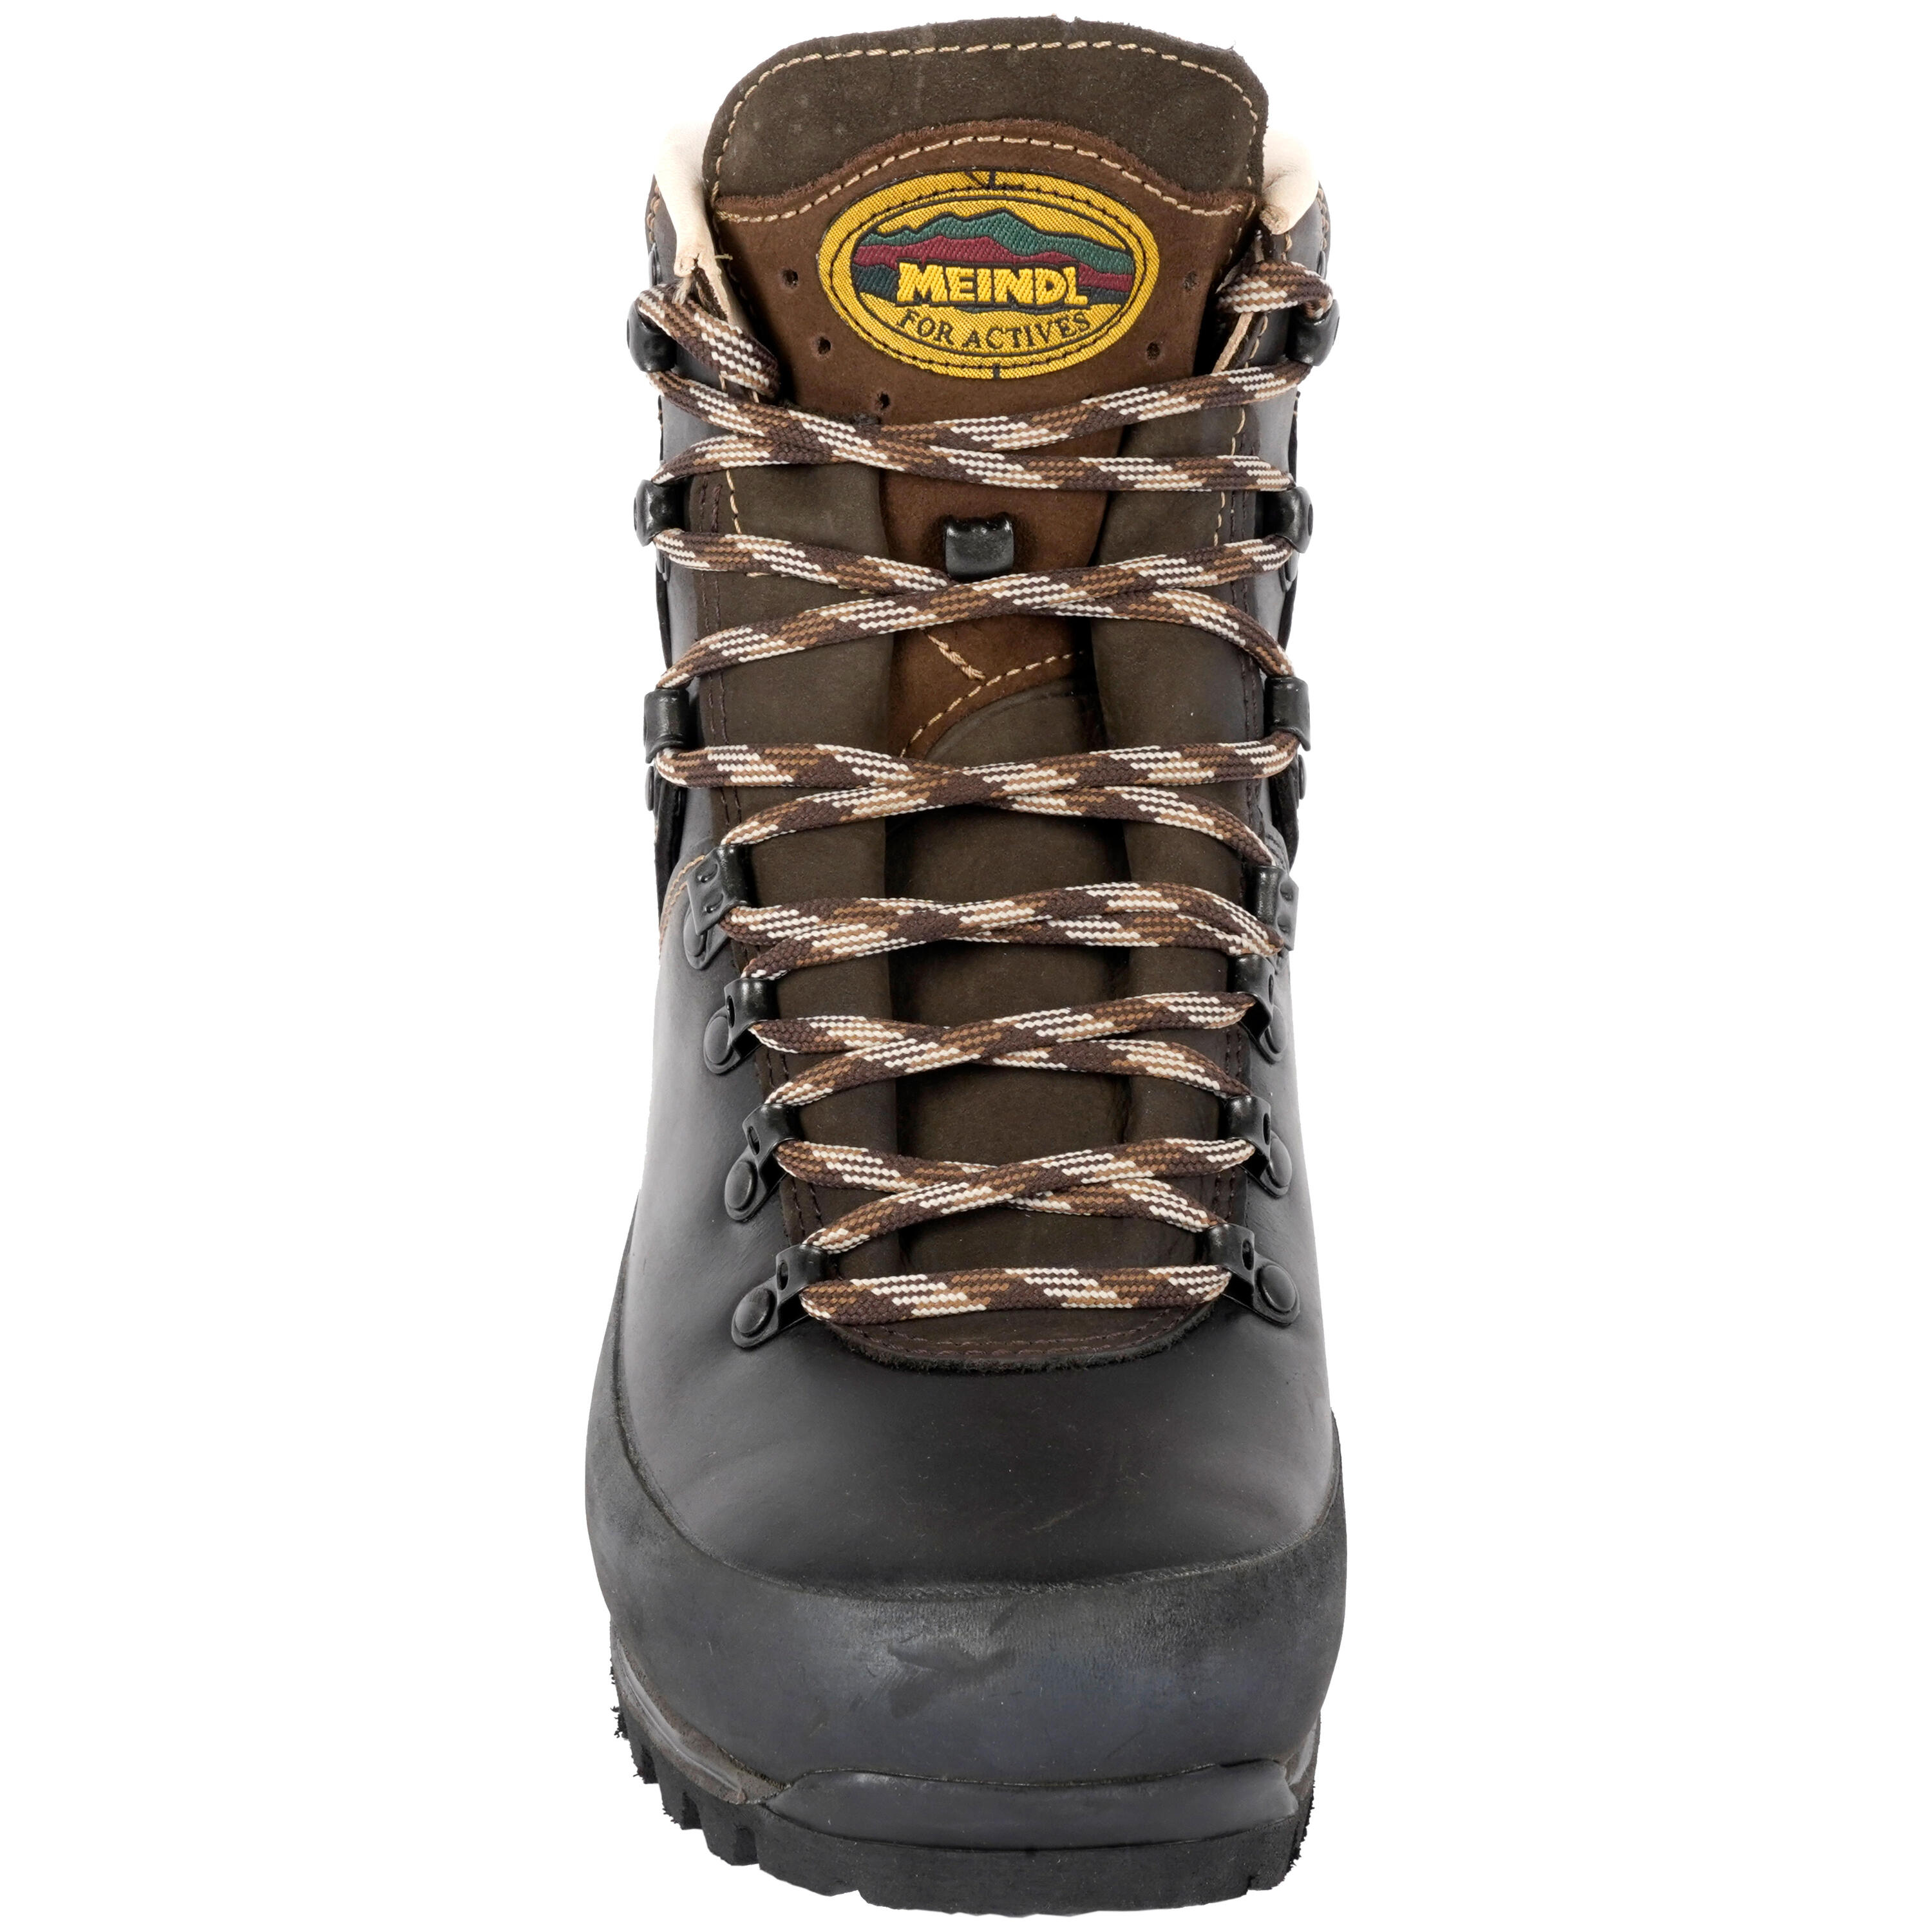 Waterproof Durable Country Sport Boots Meindl Engadin Mfs - Brown 3/6